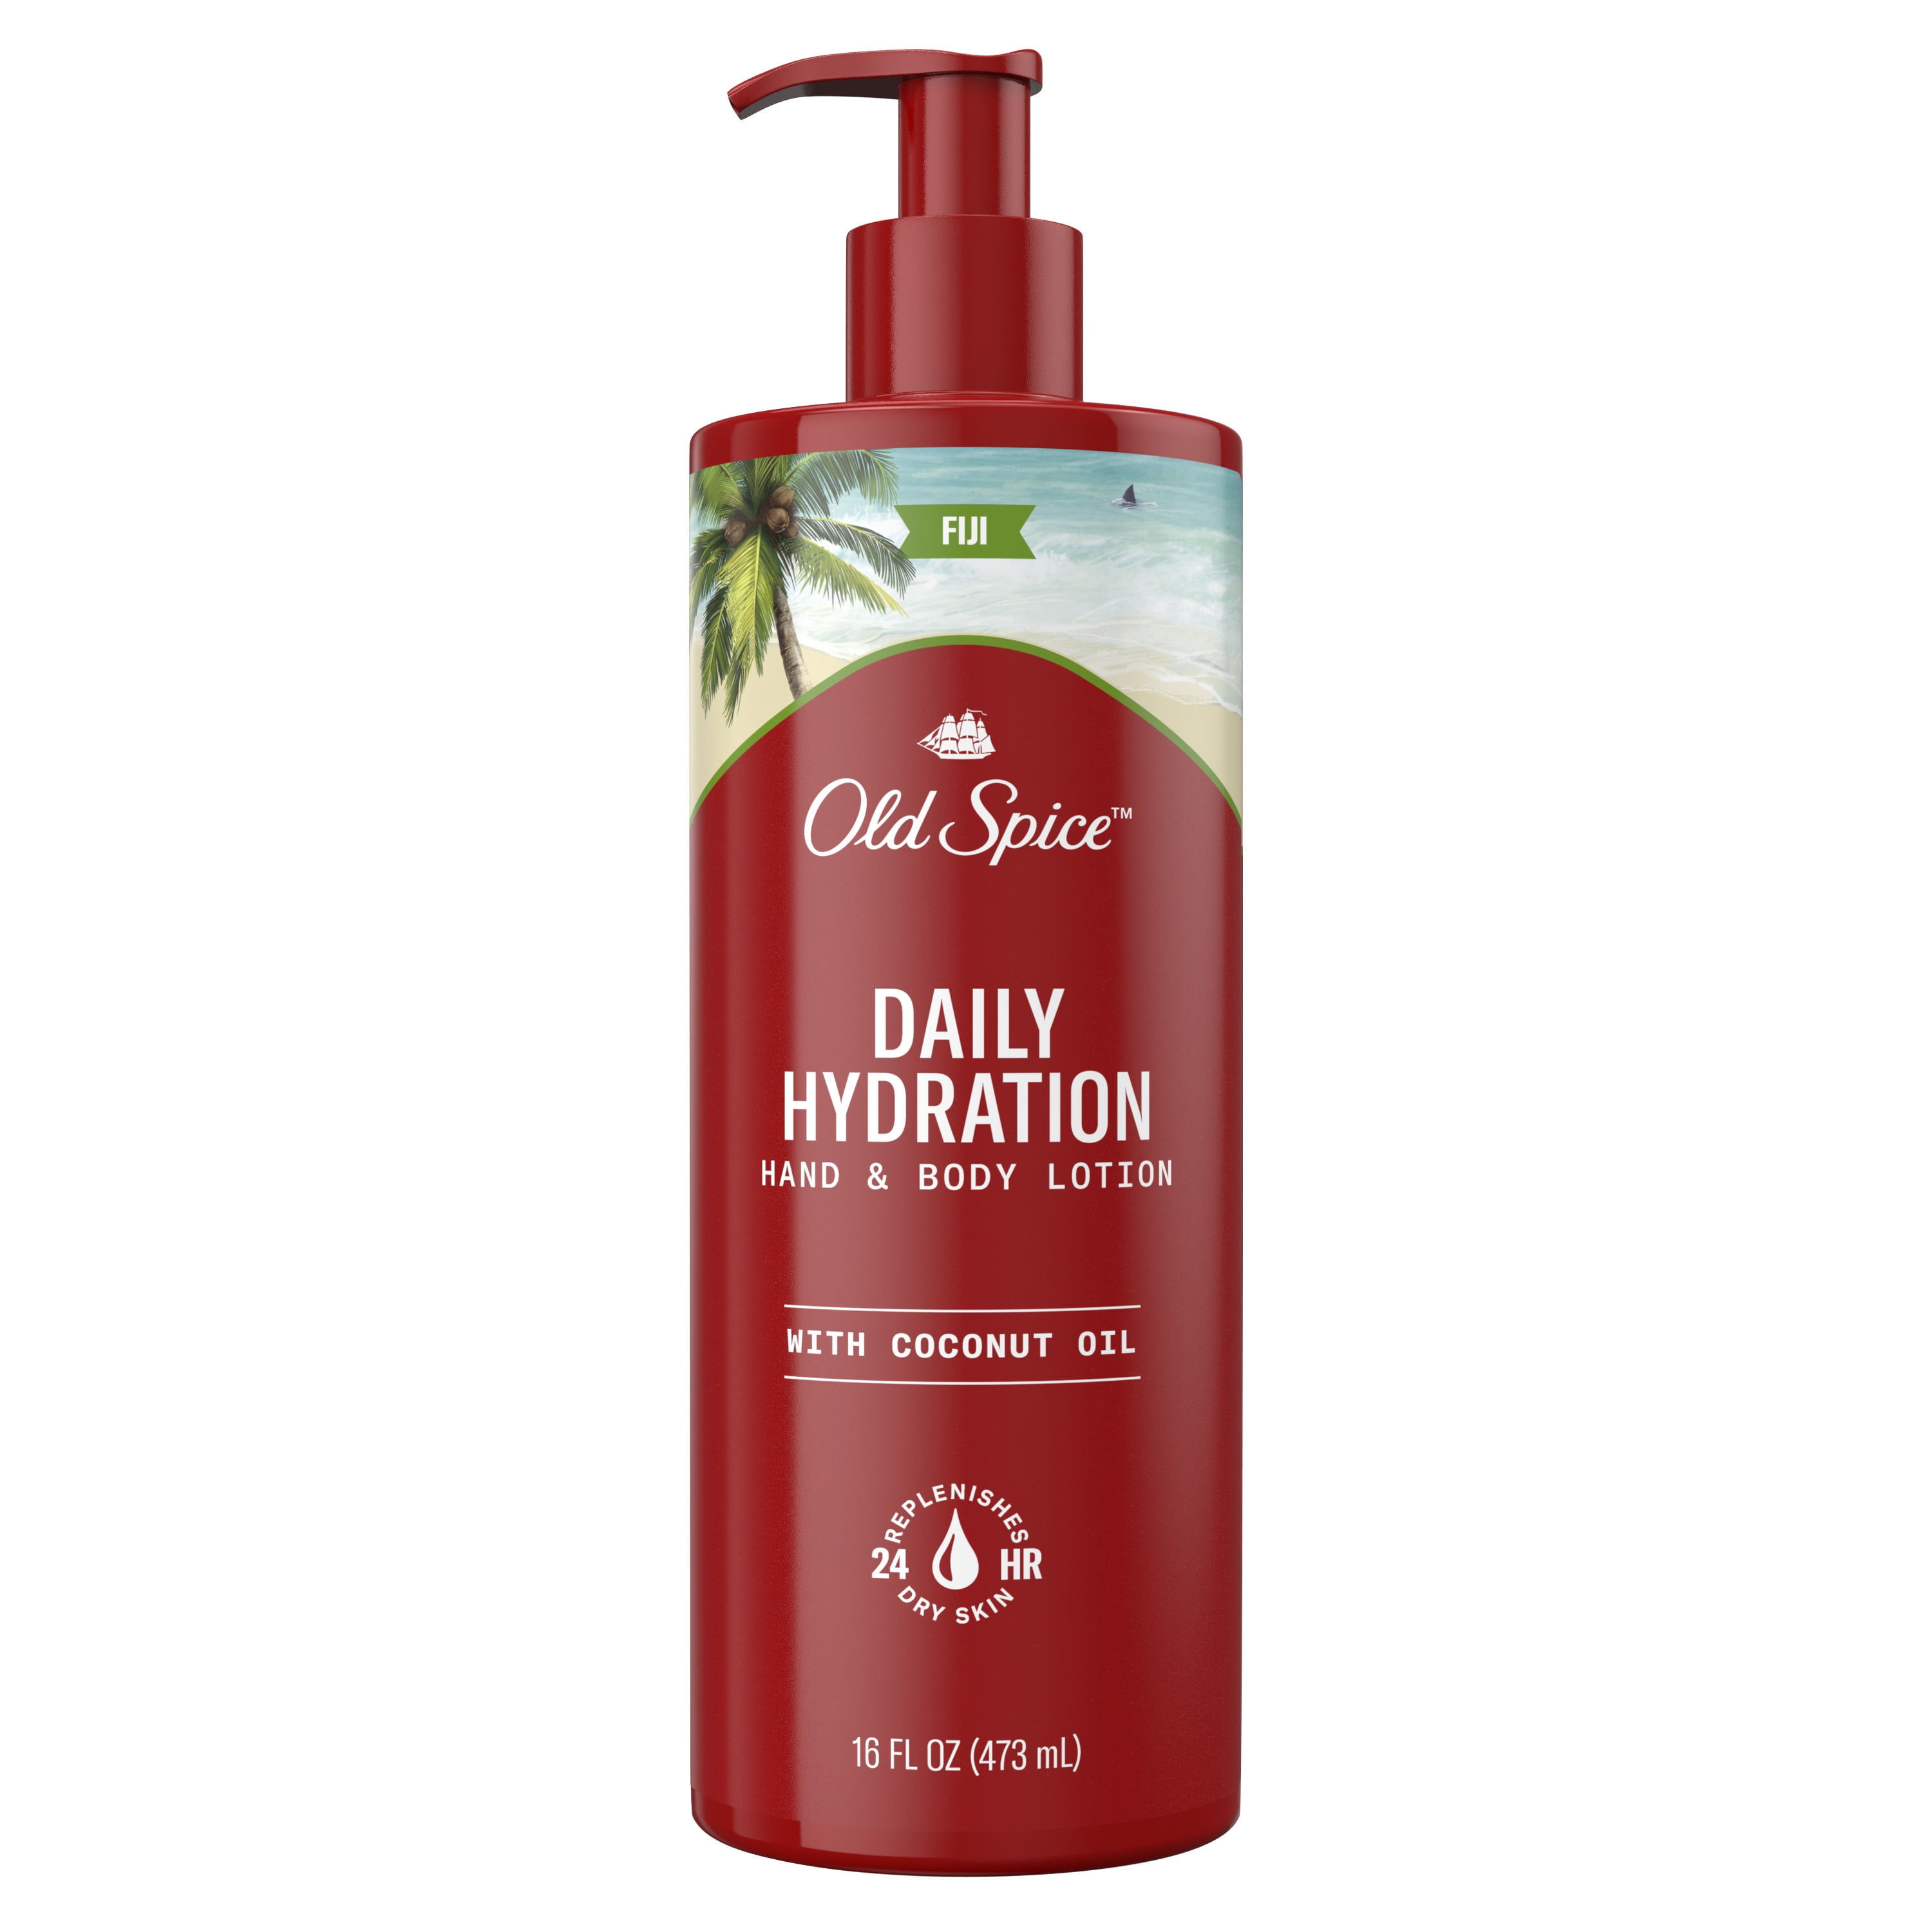 Old Spice Daily Hydration Hand & Body Lotion for Men, Fiji with Coconut Oil, 16 fl oz